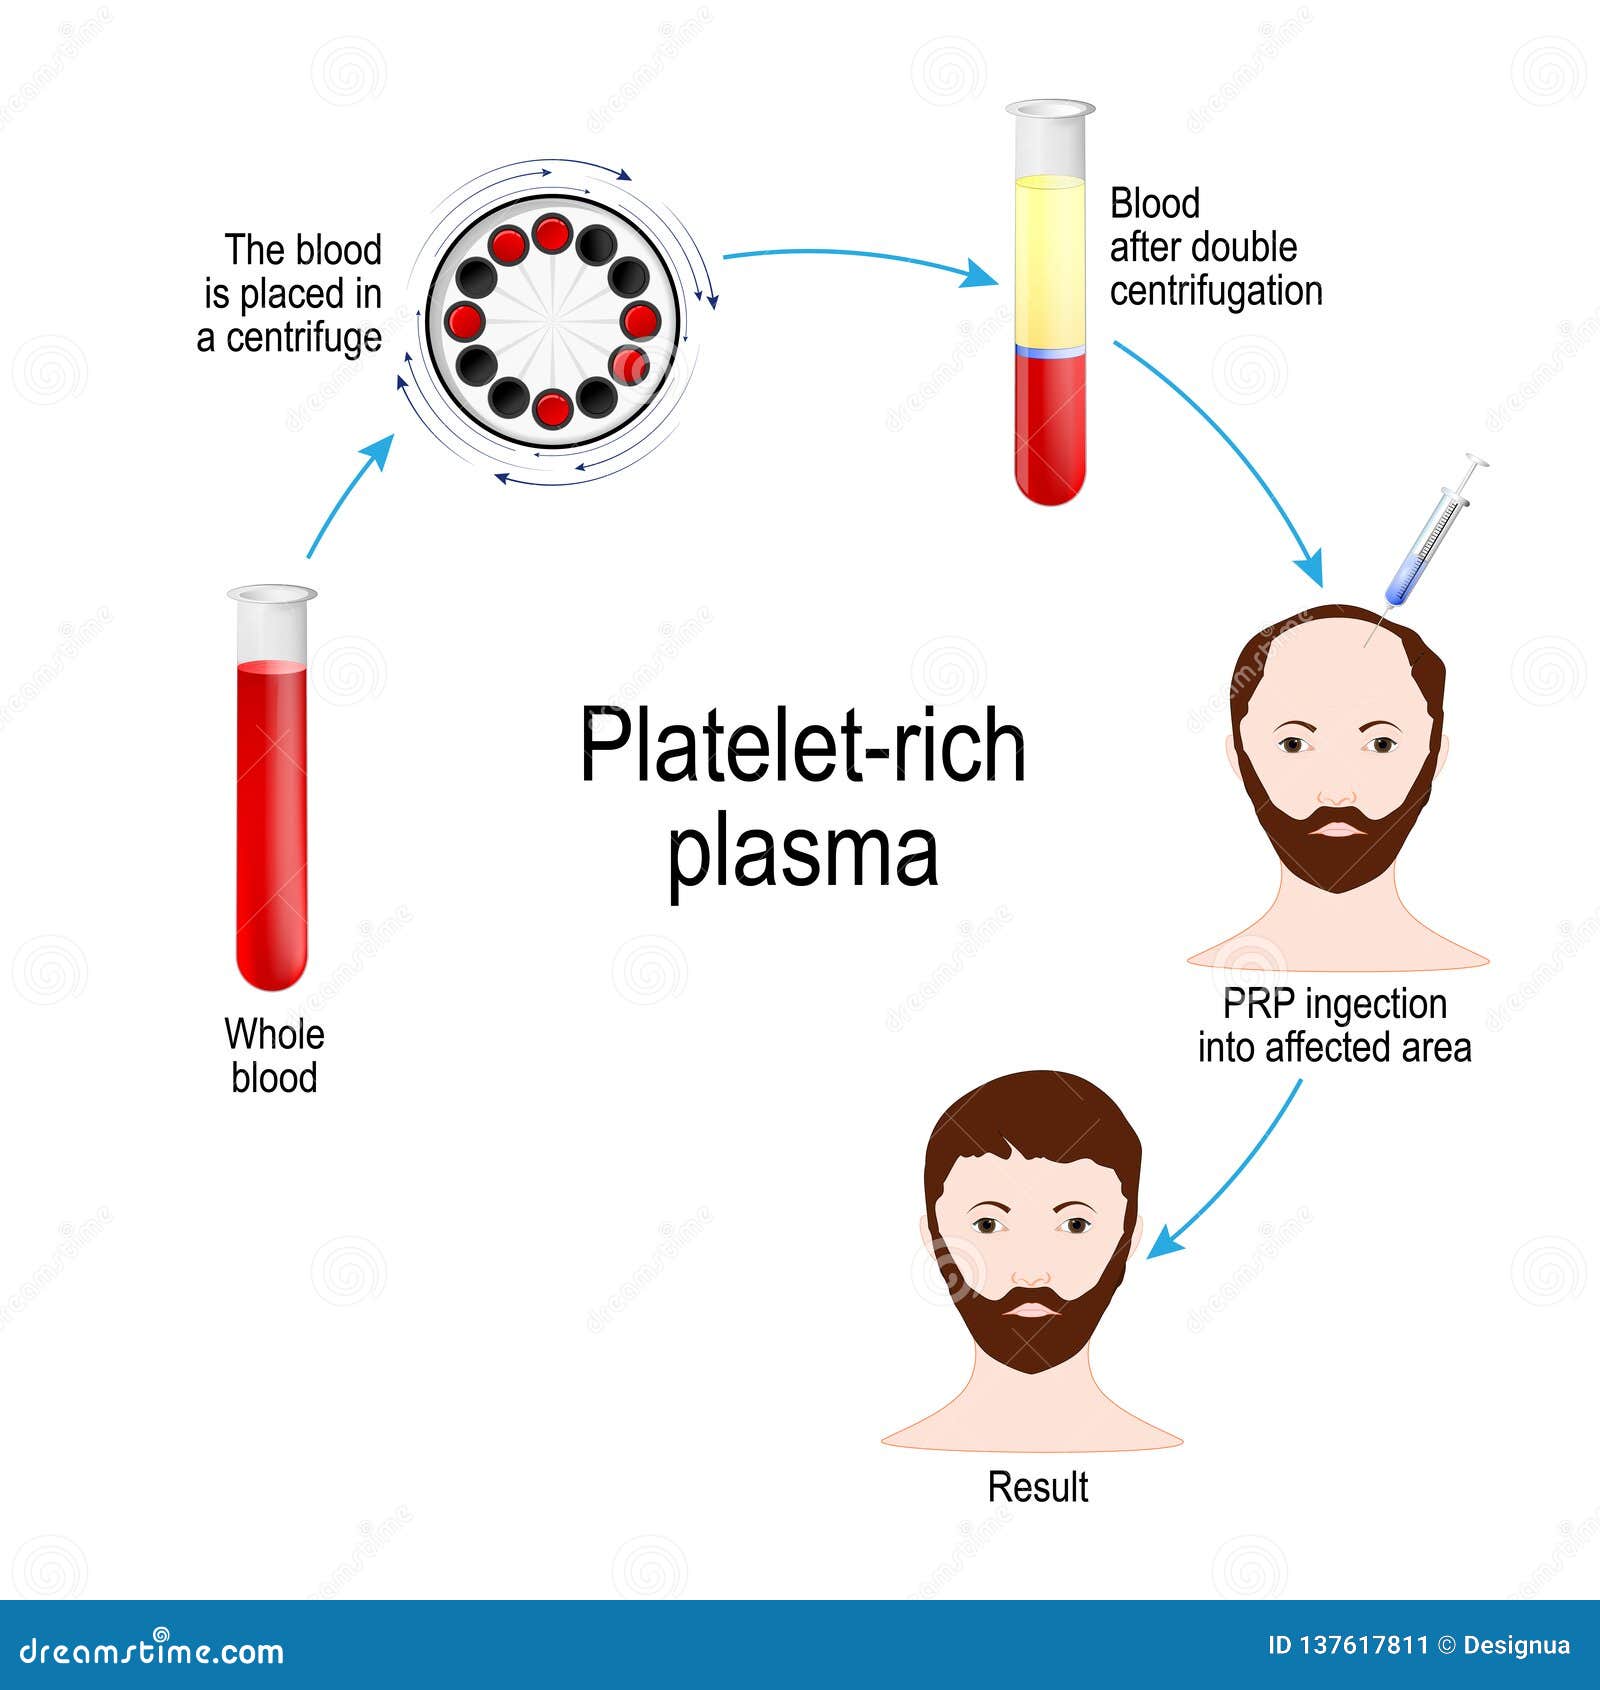 platelet-rich plasma. prp hair therapy. medical procedure